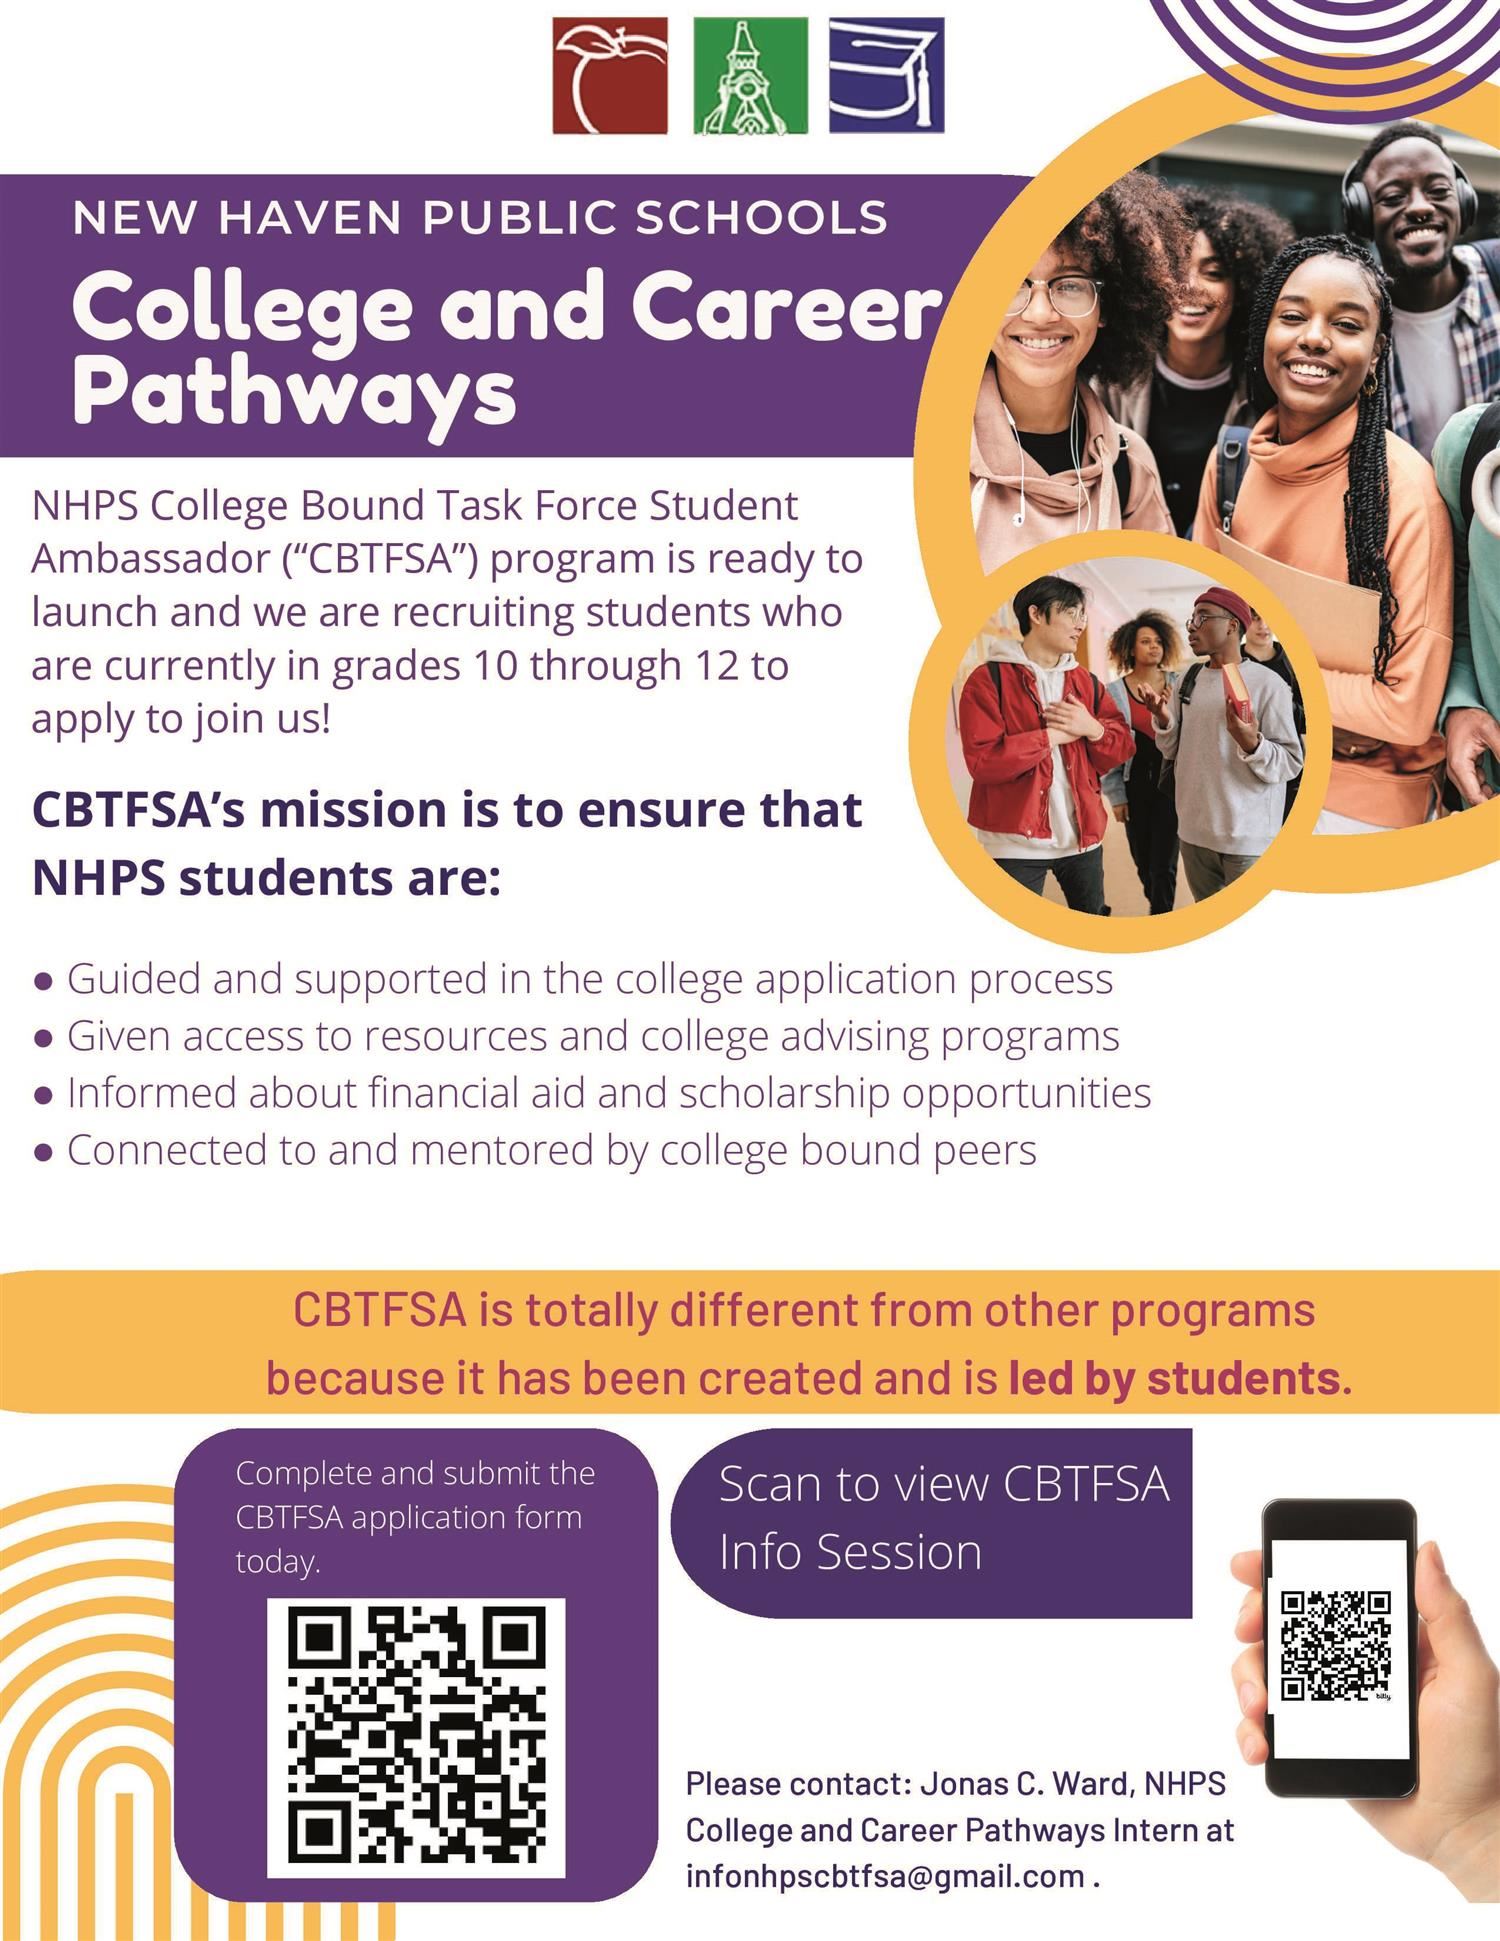 NHPS College and Careers Pathways